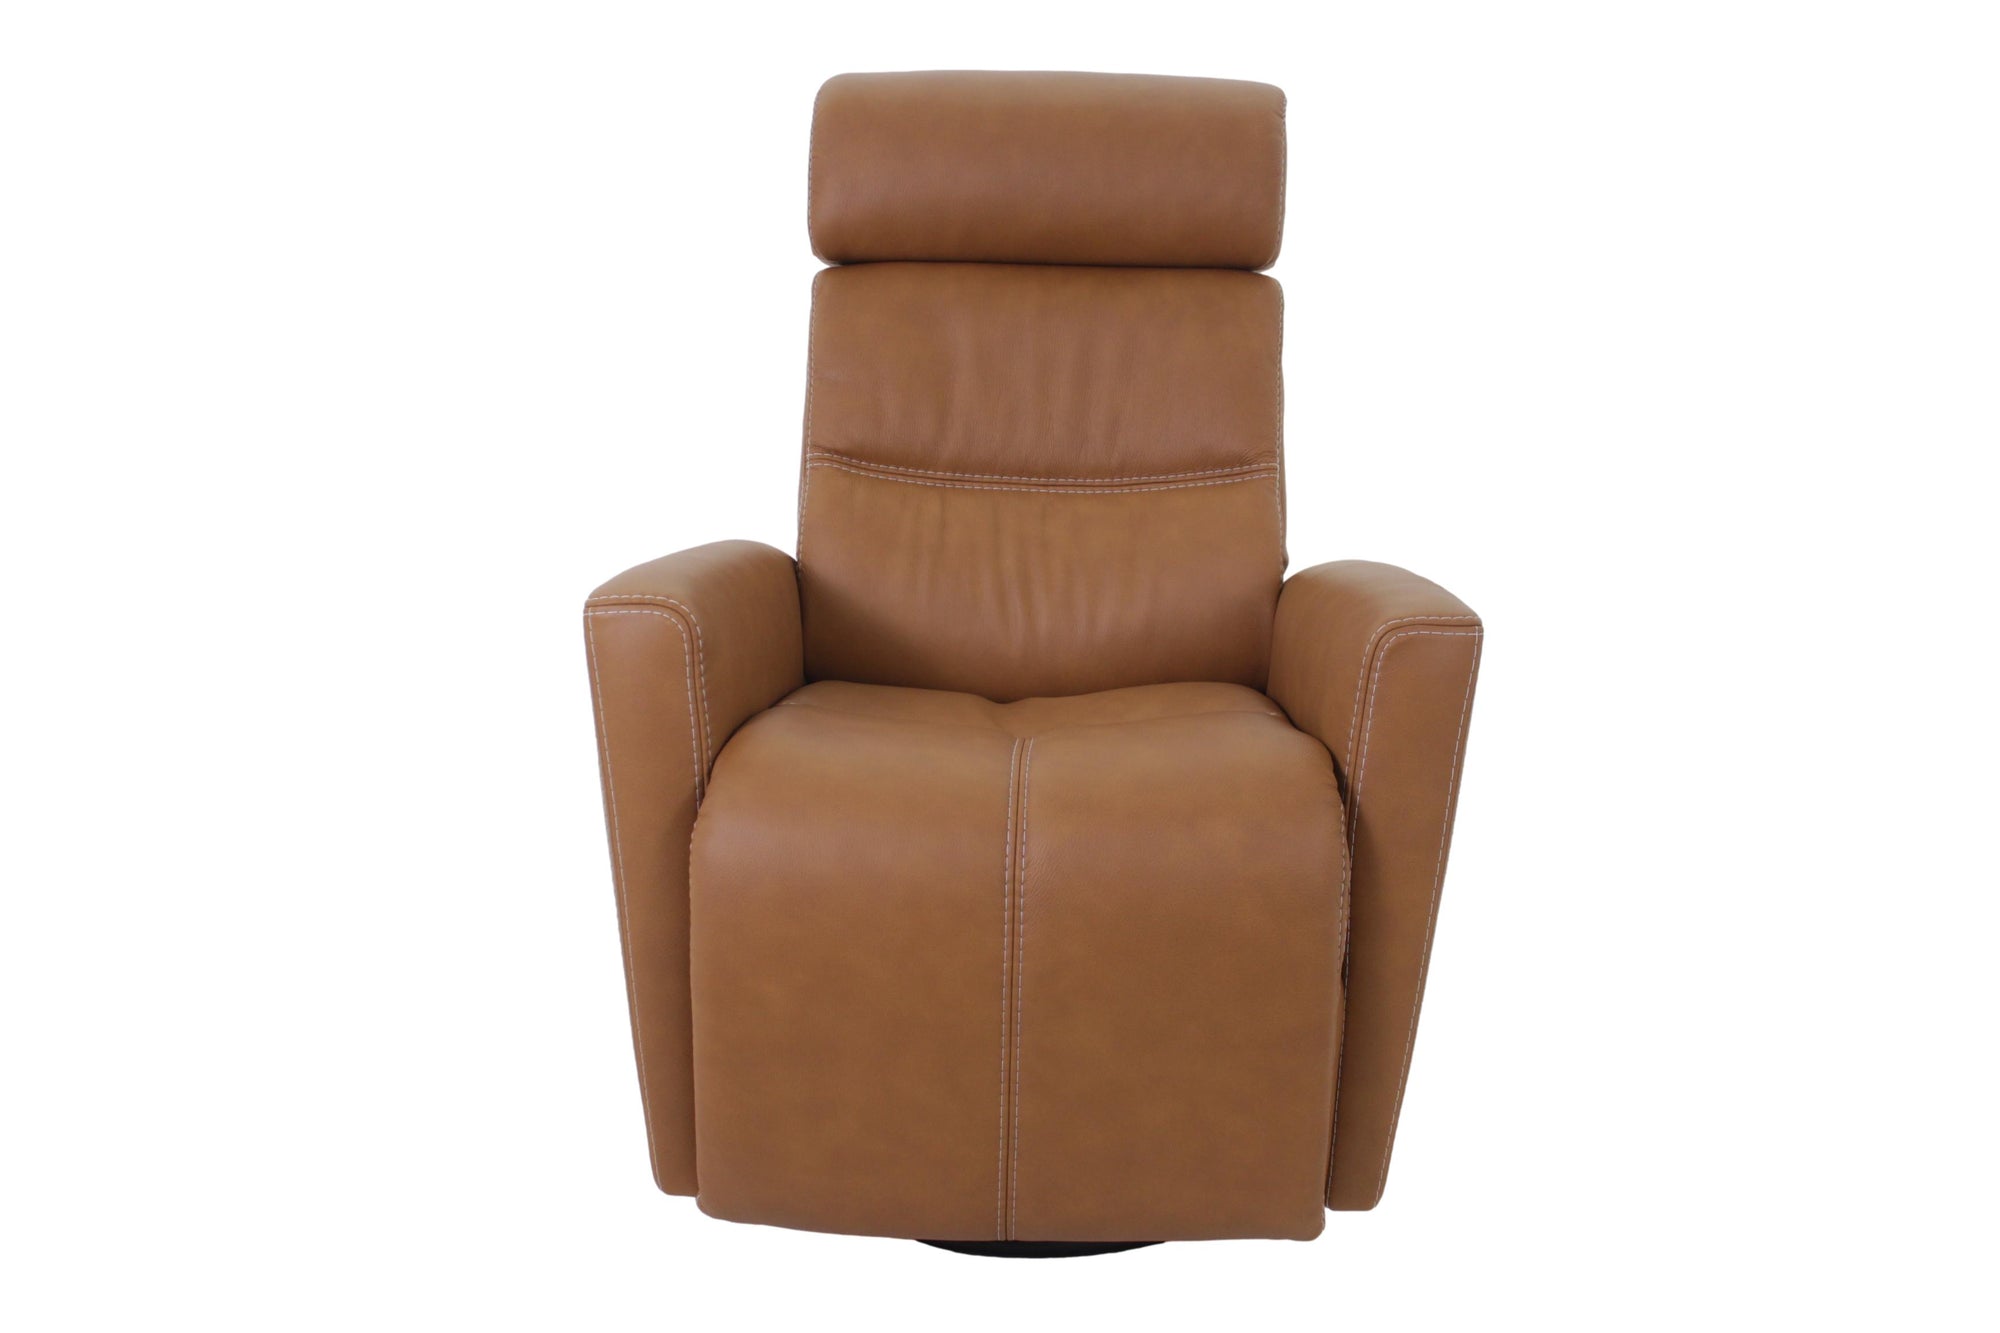 Fjords contemporary Milan living room reclining leather recliner